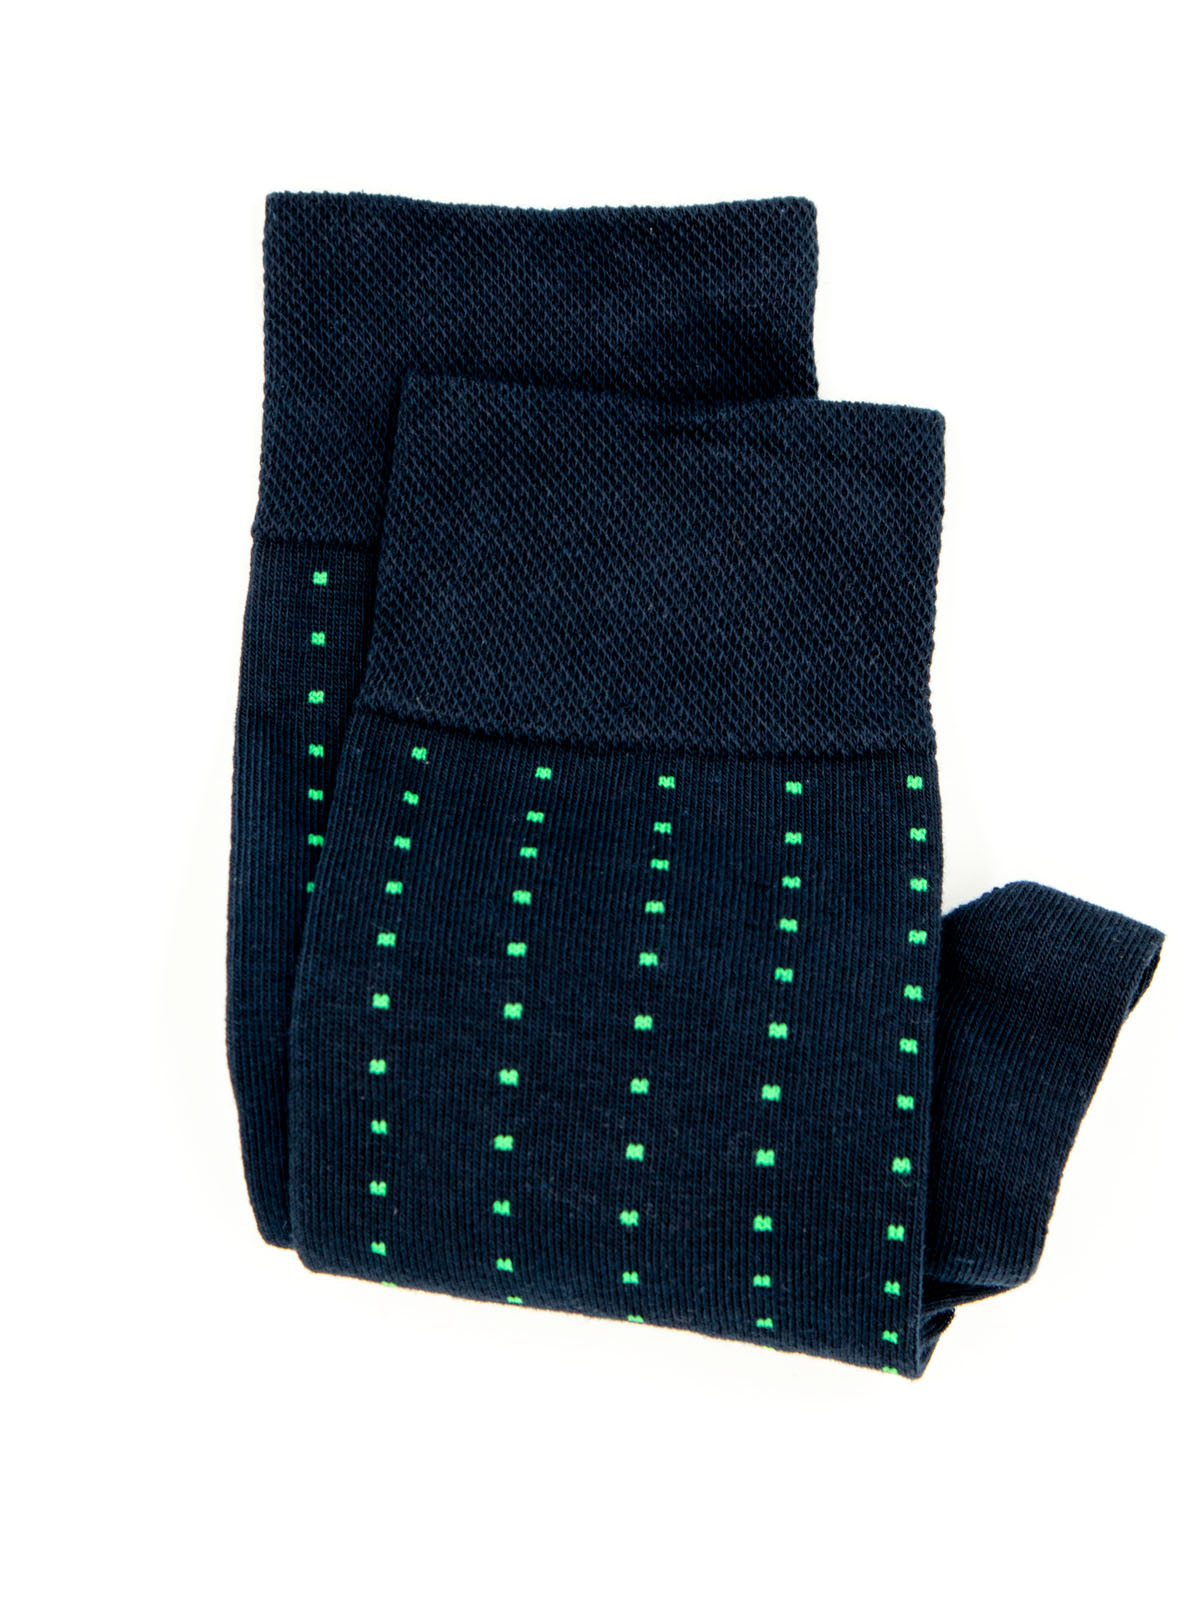 Dark blue socks with green squares - 10525 - € 3.94 img3